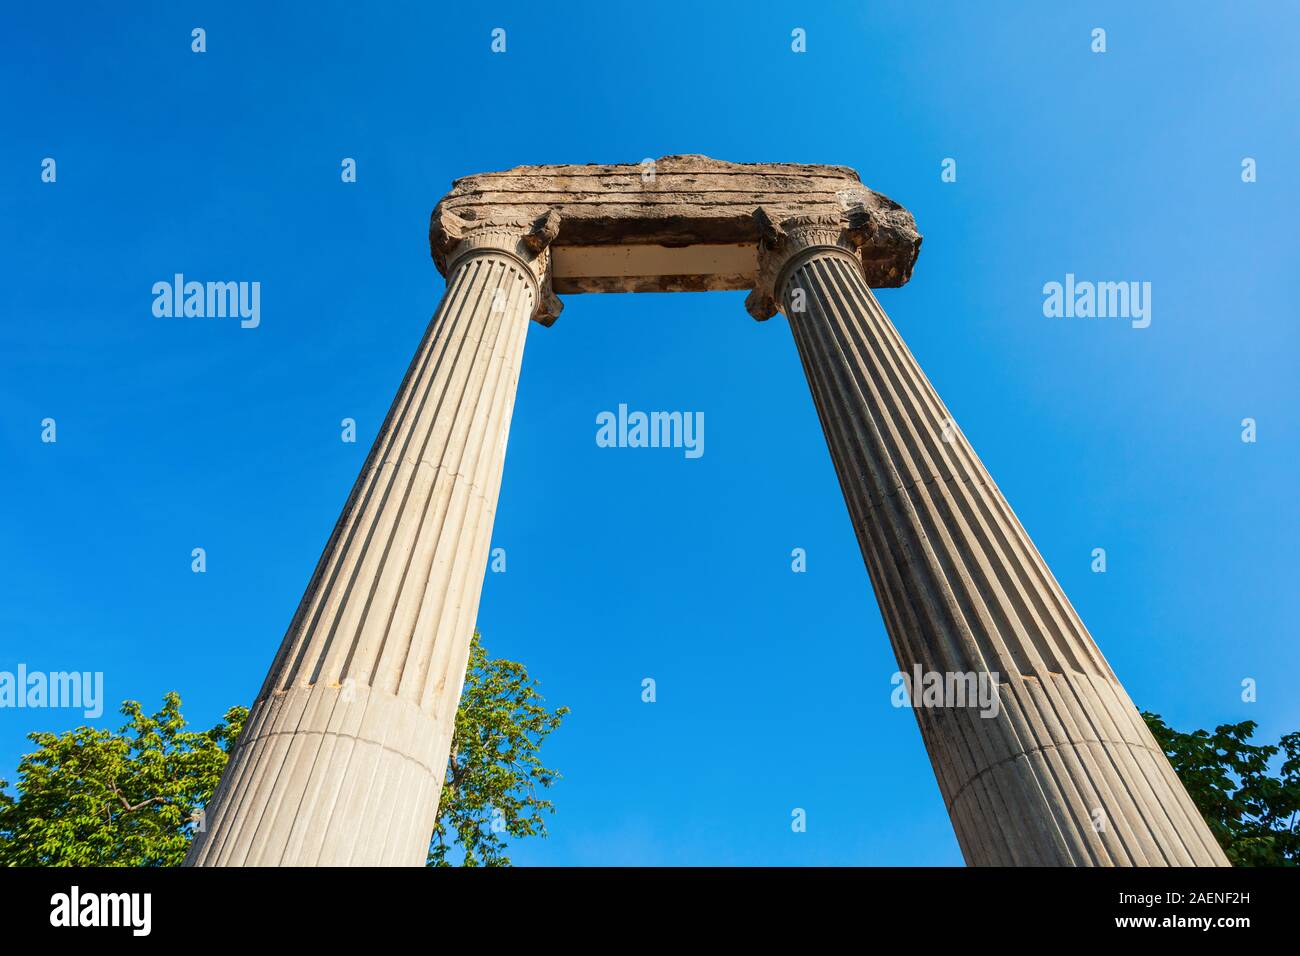 Roman Corinthian column from Noviodunum in Nyon. Nyon is a town on the shores of Lake Geneva in the canton of Vaud in Switzerland Stock Photo